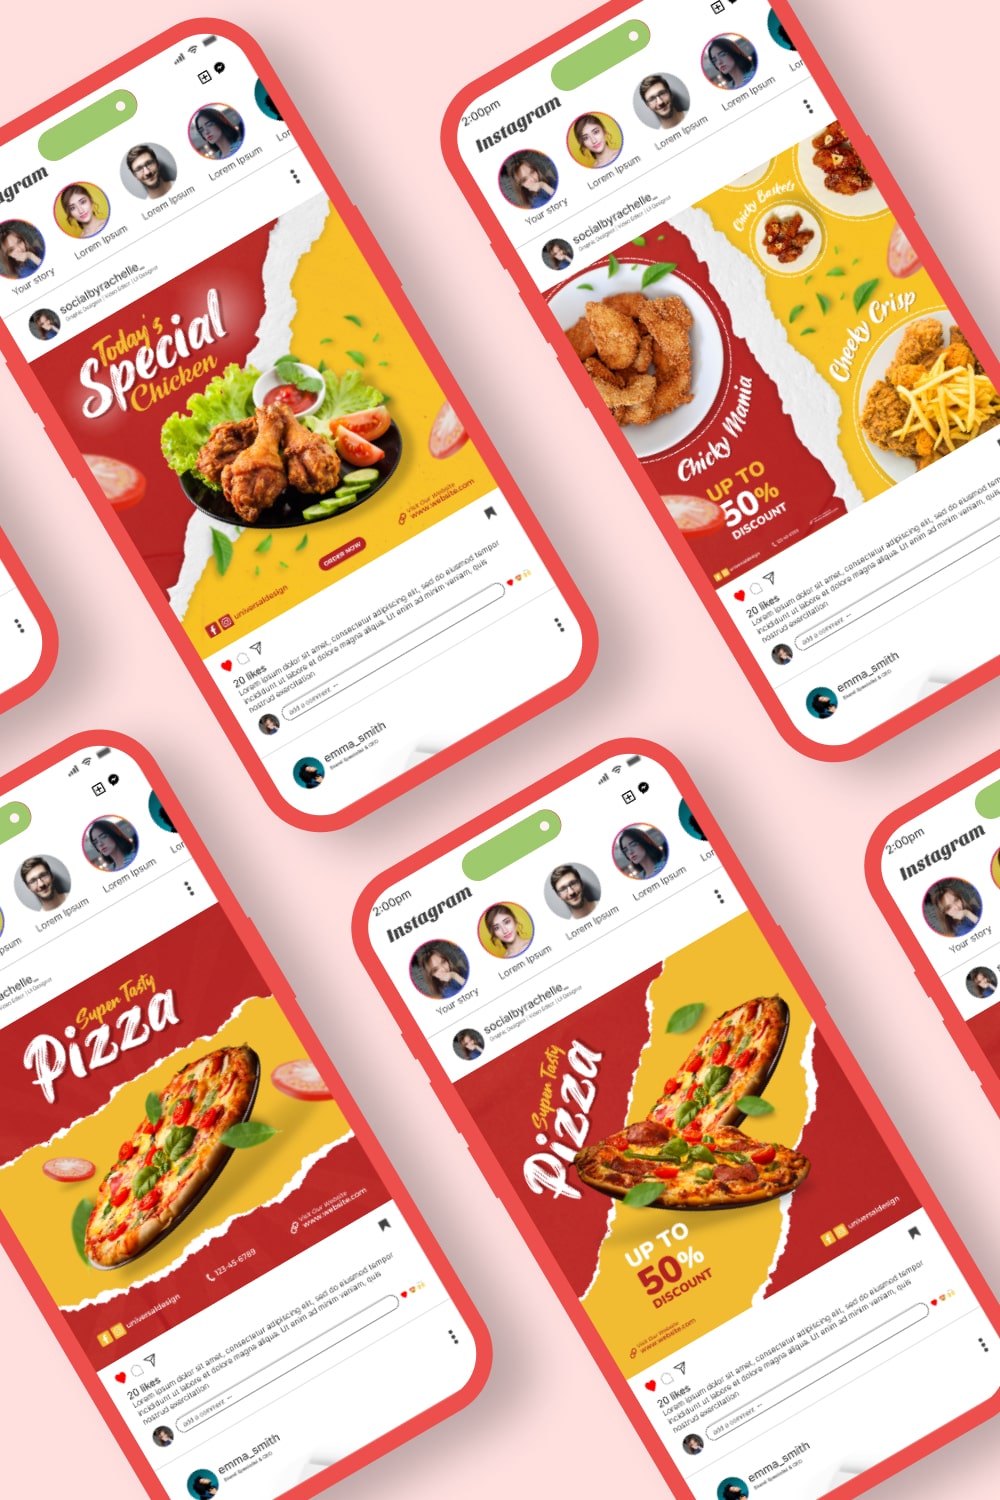 Templates for superb food social media banners/flyers pinterest preview image.